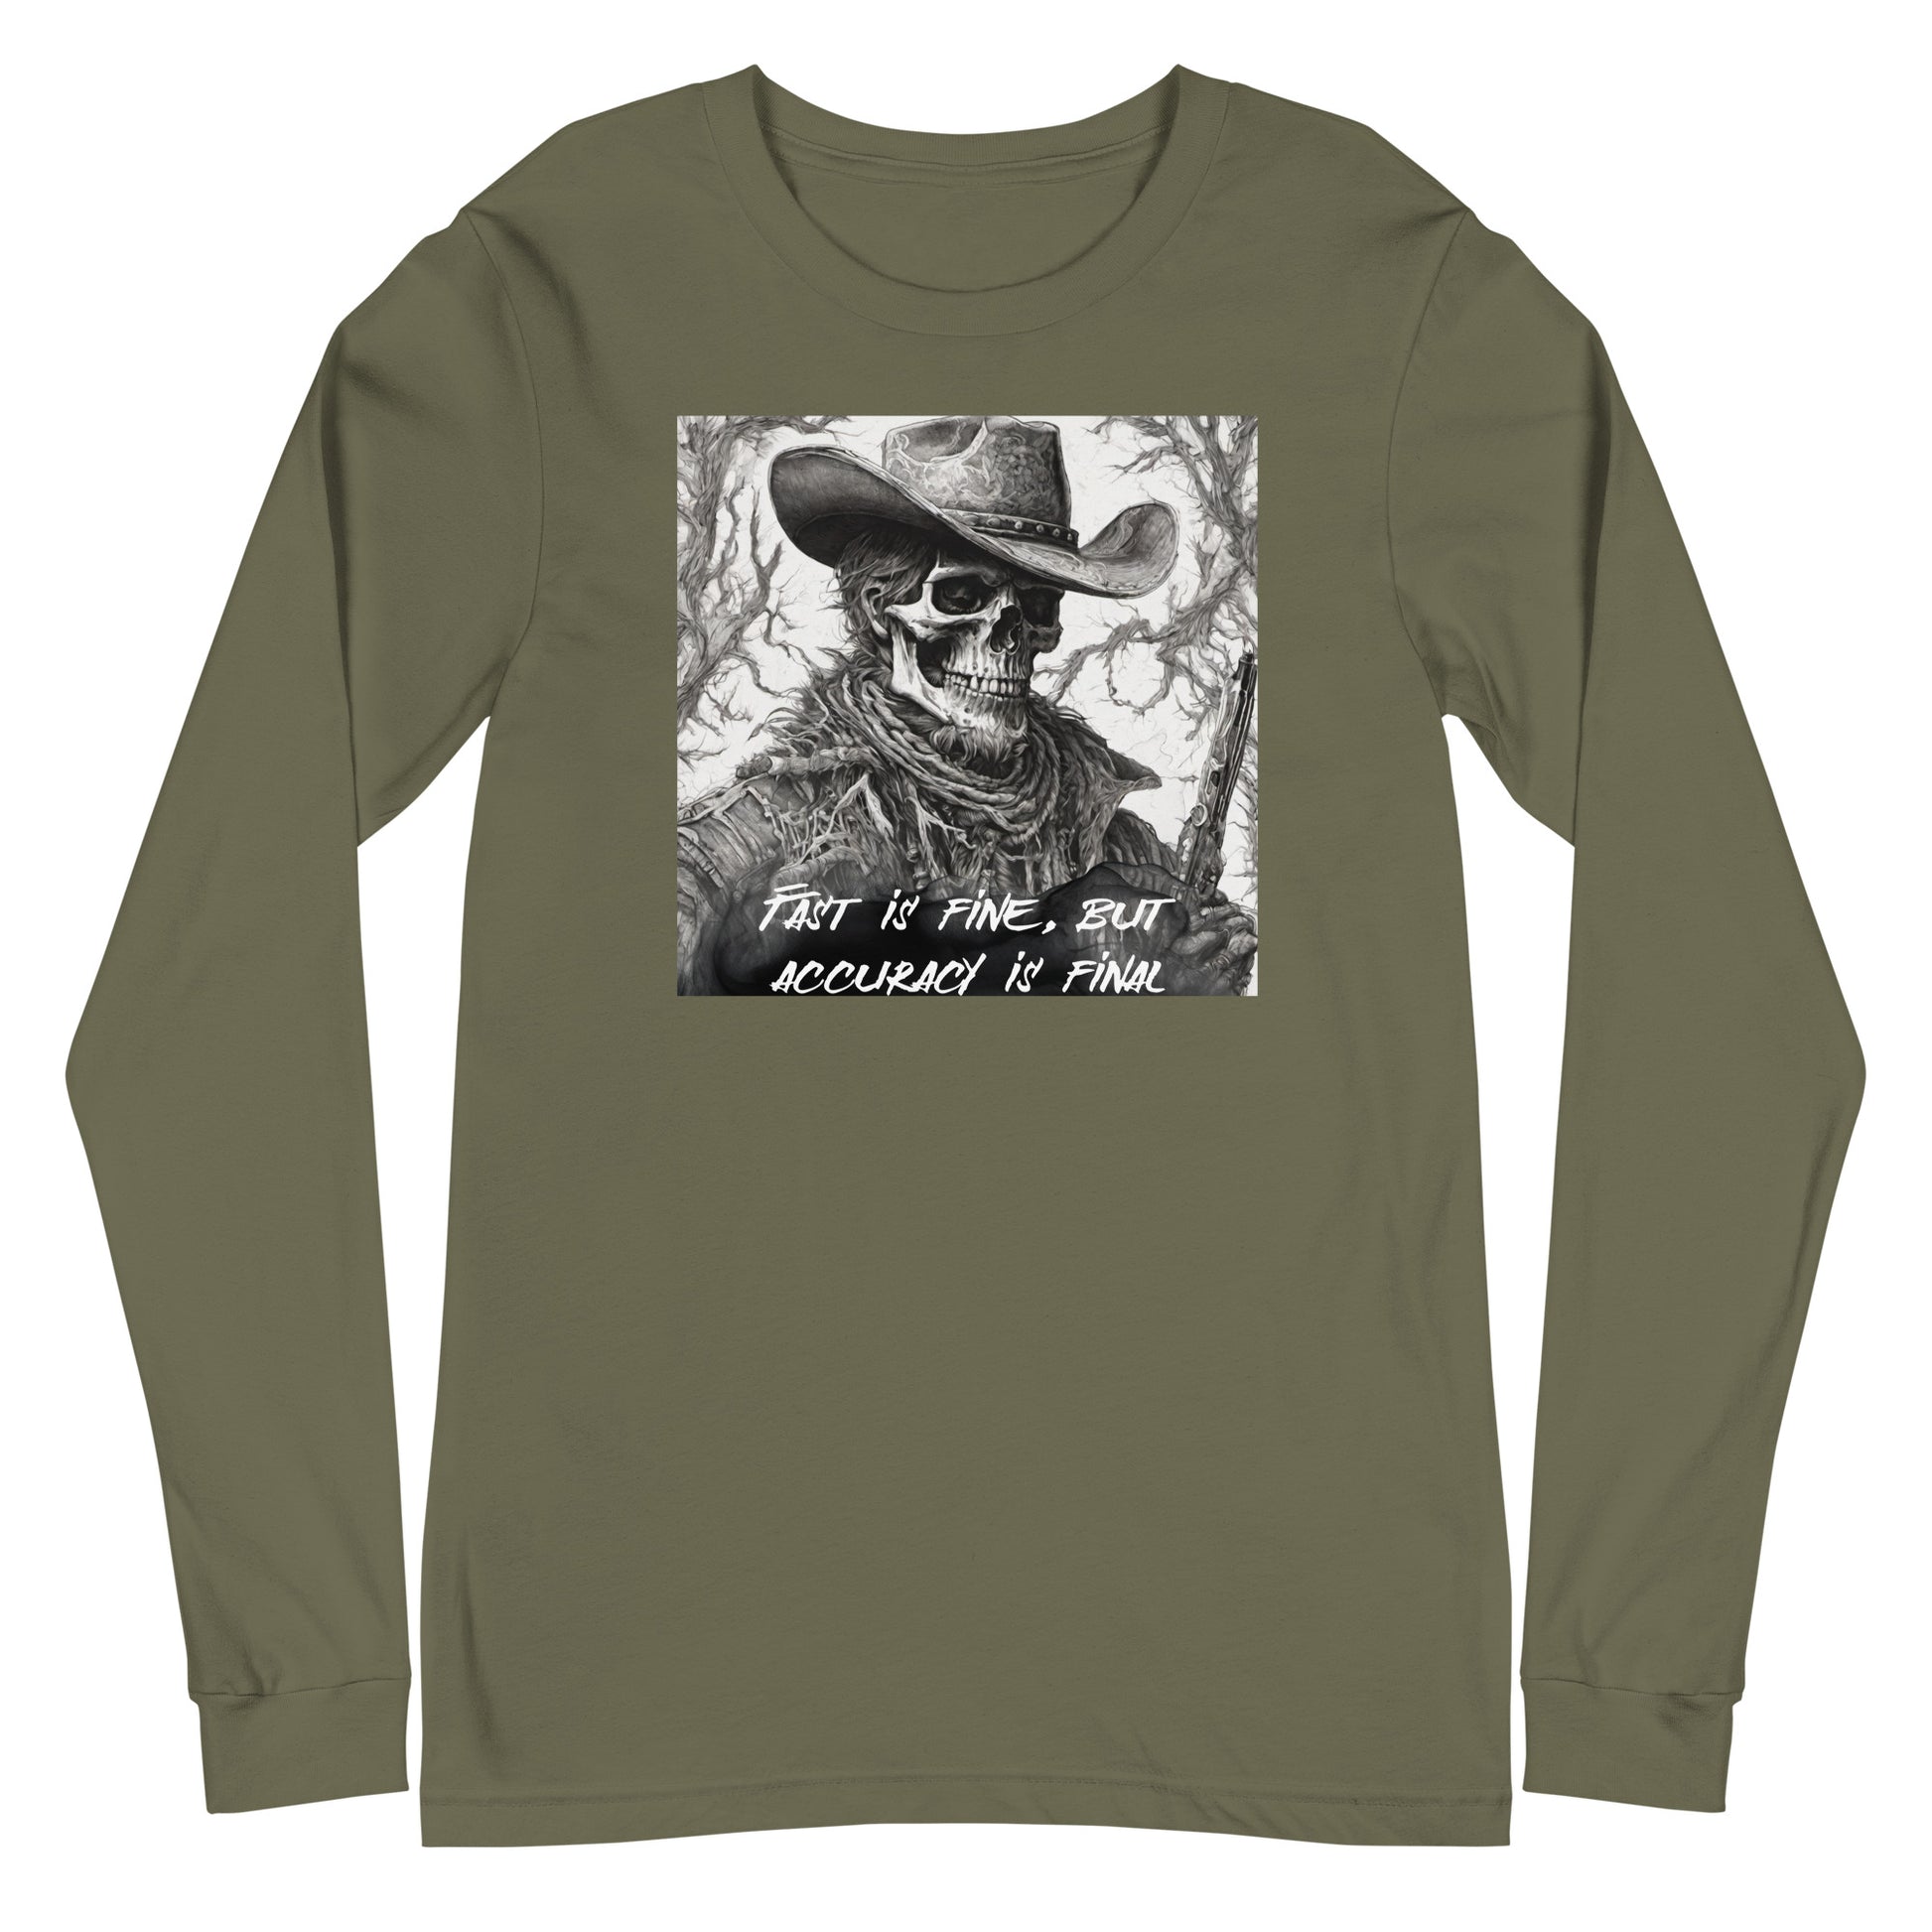 Accuracy is Final Men's Long Sleeve Tee Military Green